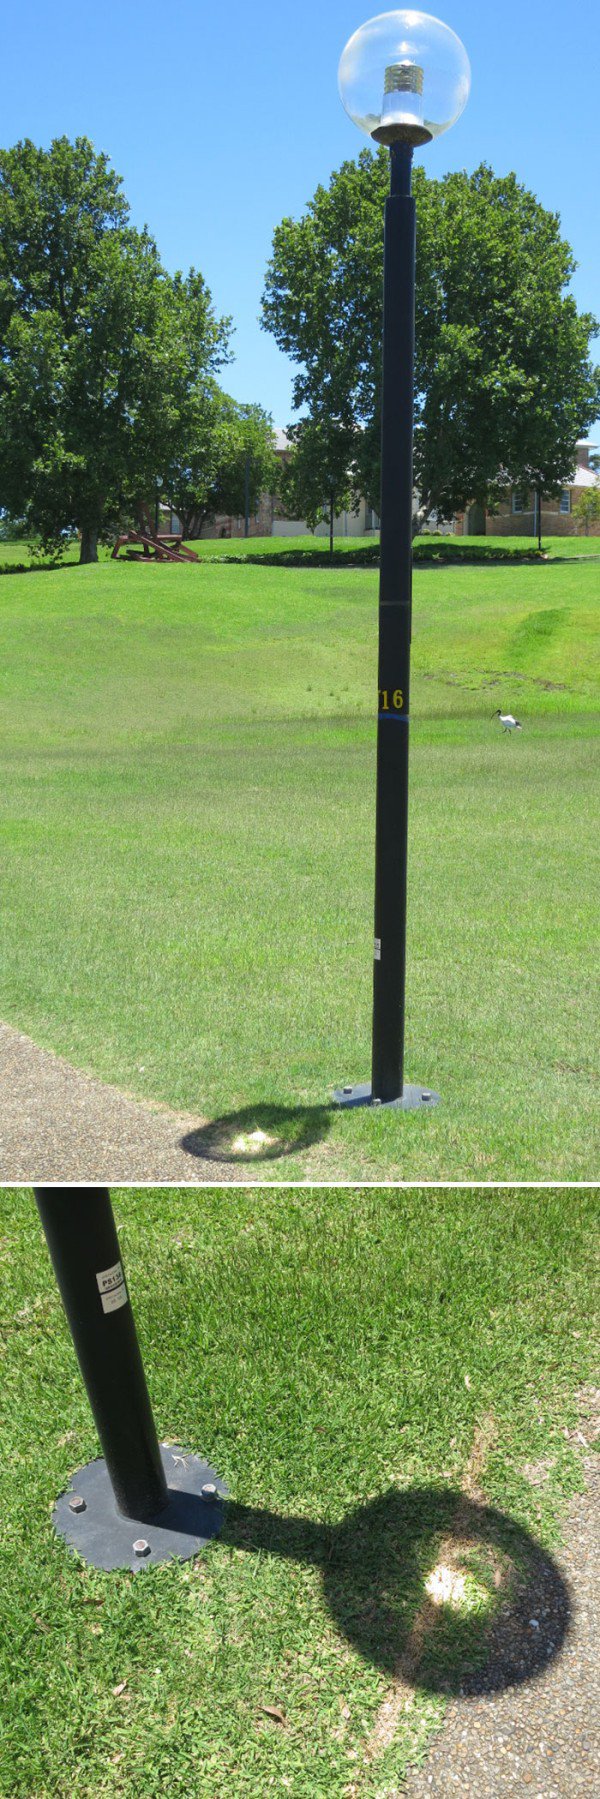 Spherical shaped street lamp that causes a small magnified point on the ground from the sun, which has etched a line in the ground